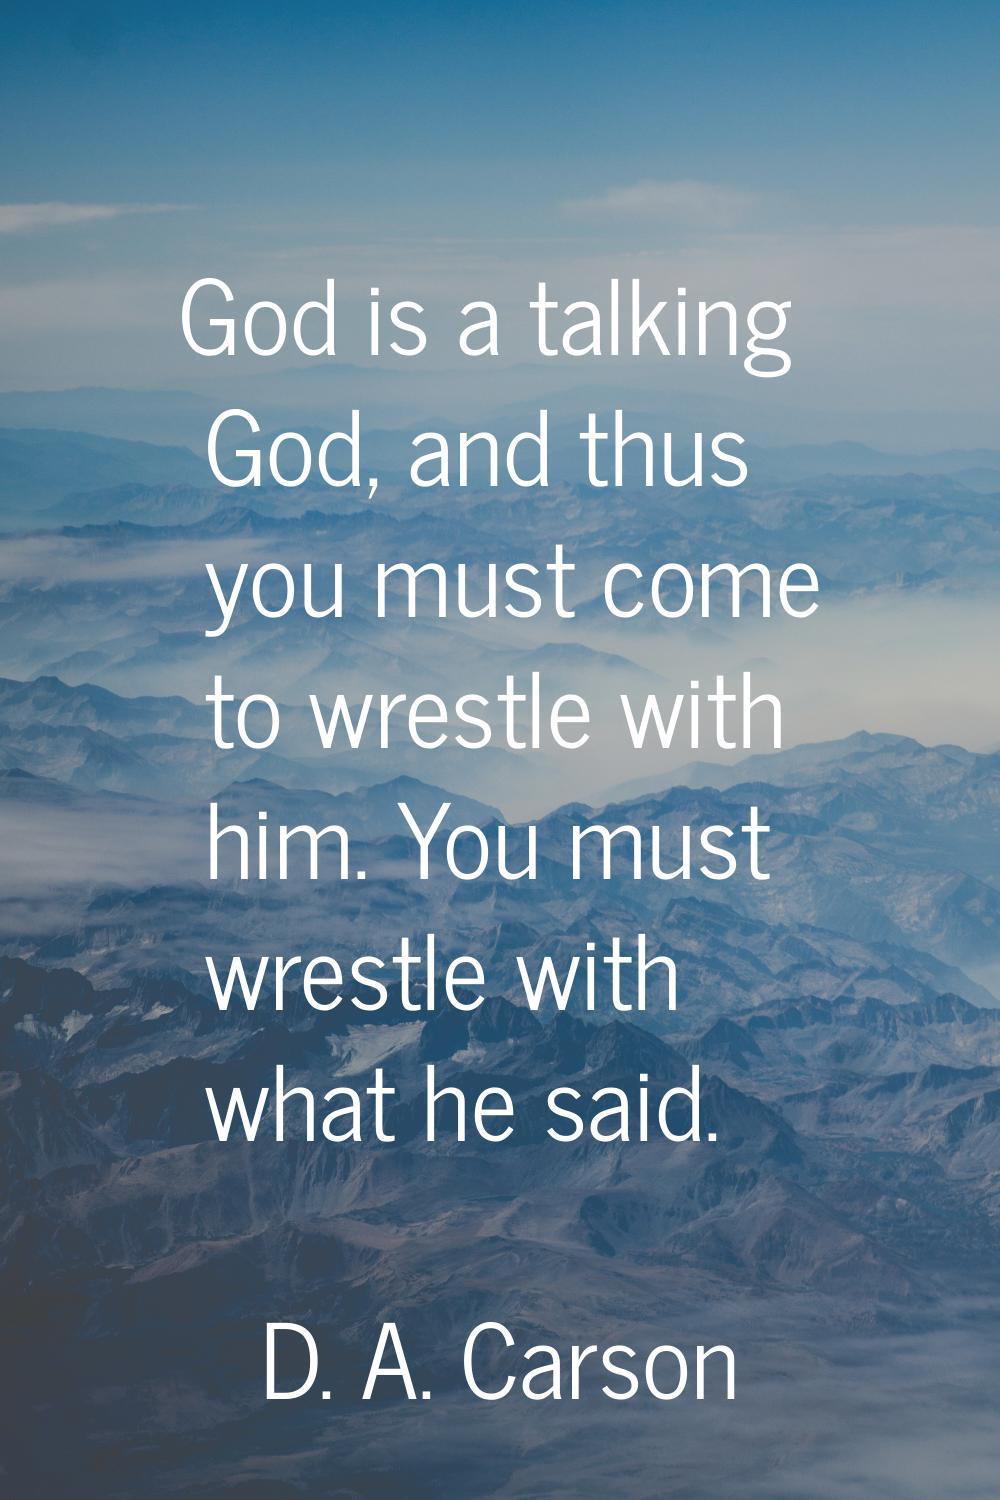 God is a talking God, and thus you must come to wrestle with him. You must wrestle with what he sai